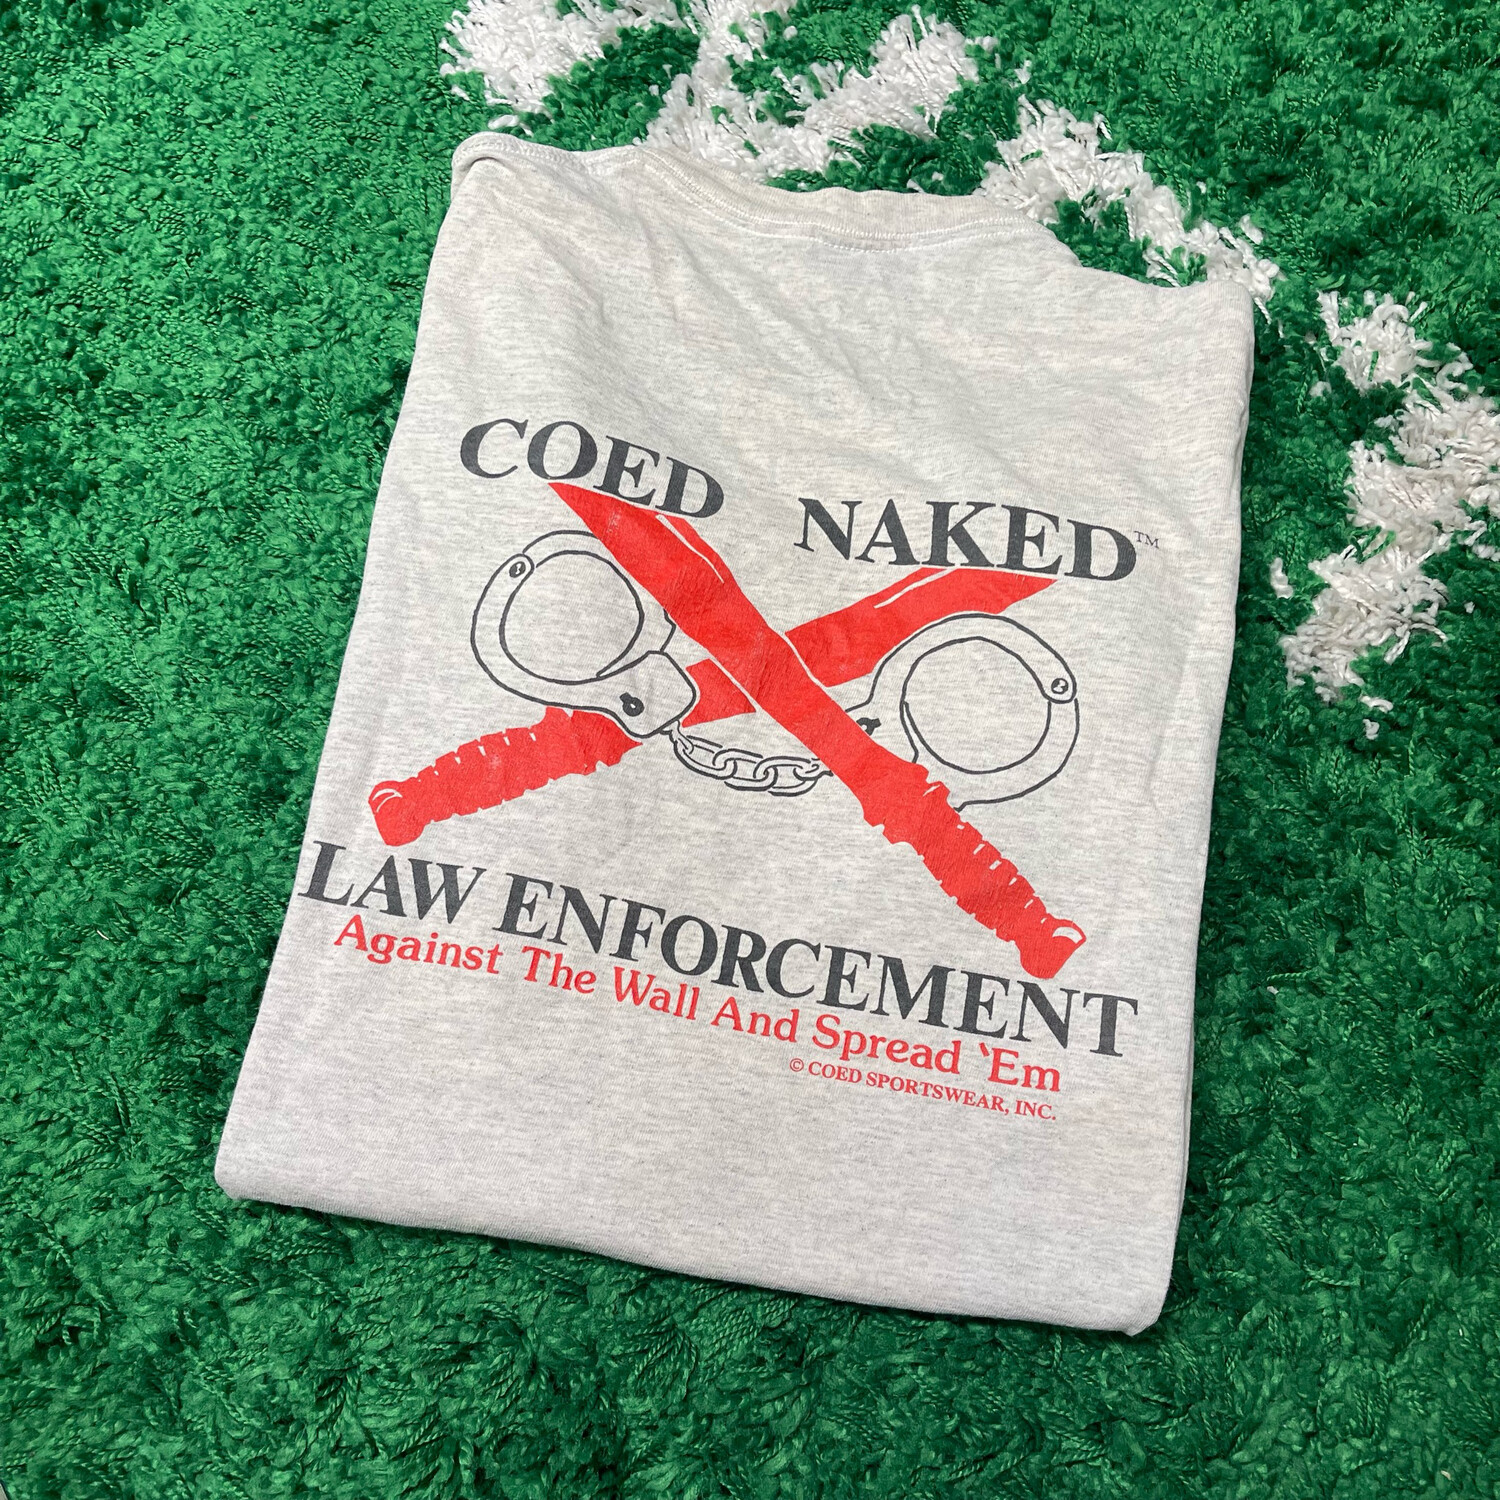 Coed Naked Law Enforcement Tee Size XL